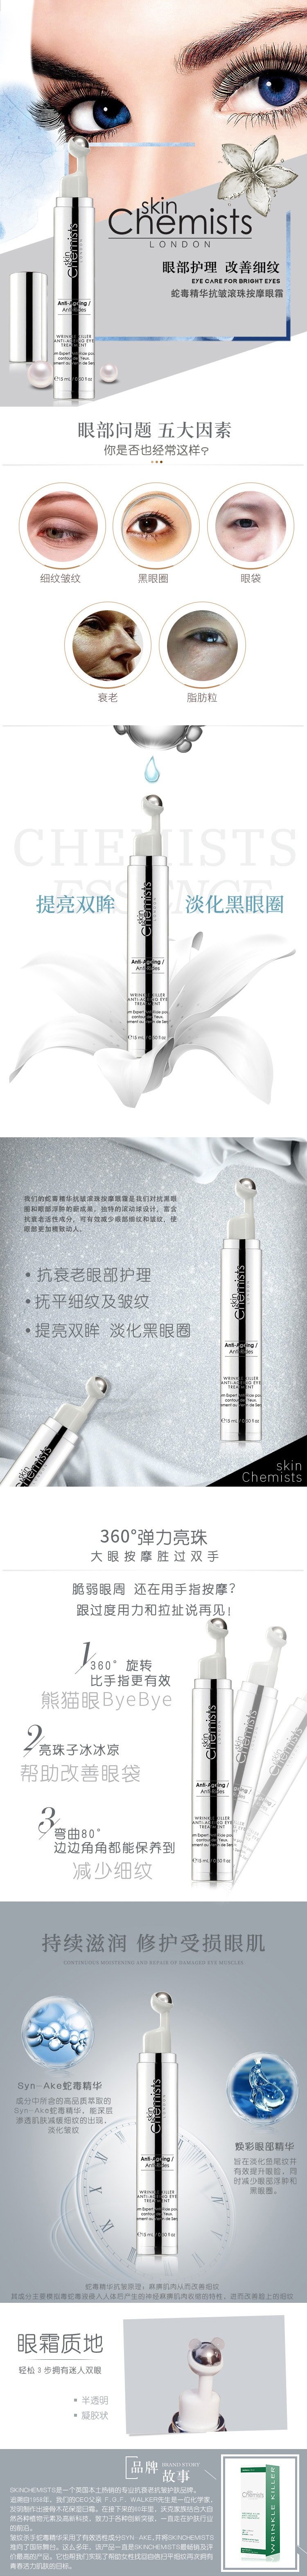 Wrinkle Anti-Ageing Eye Treatment - Introduction